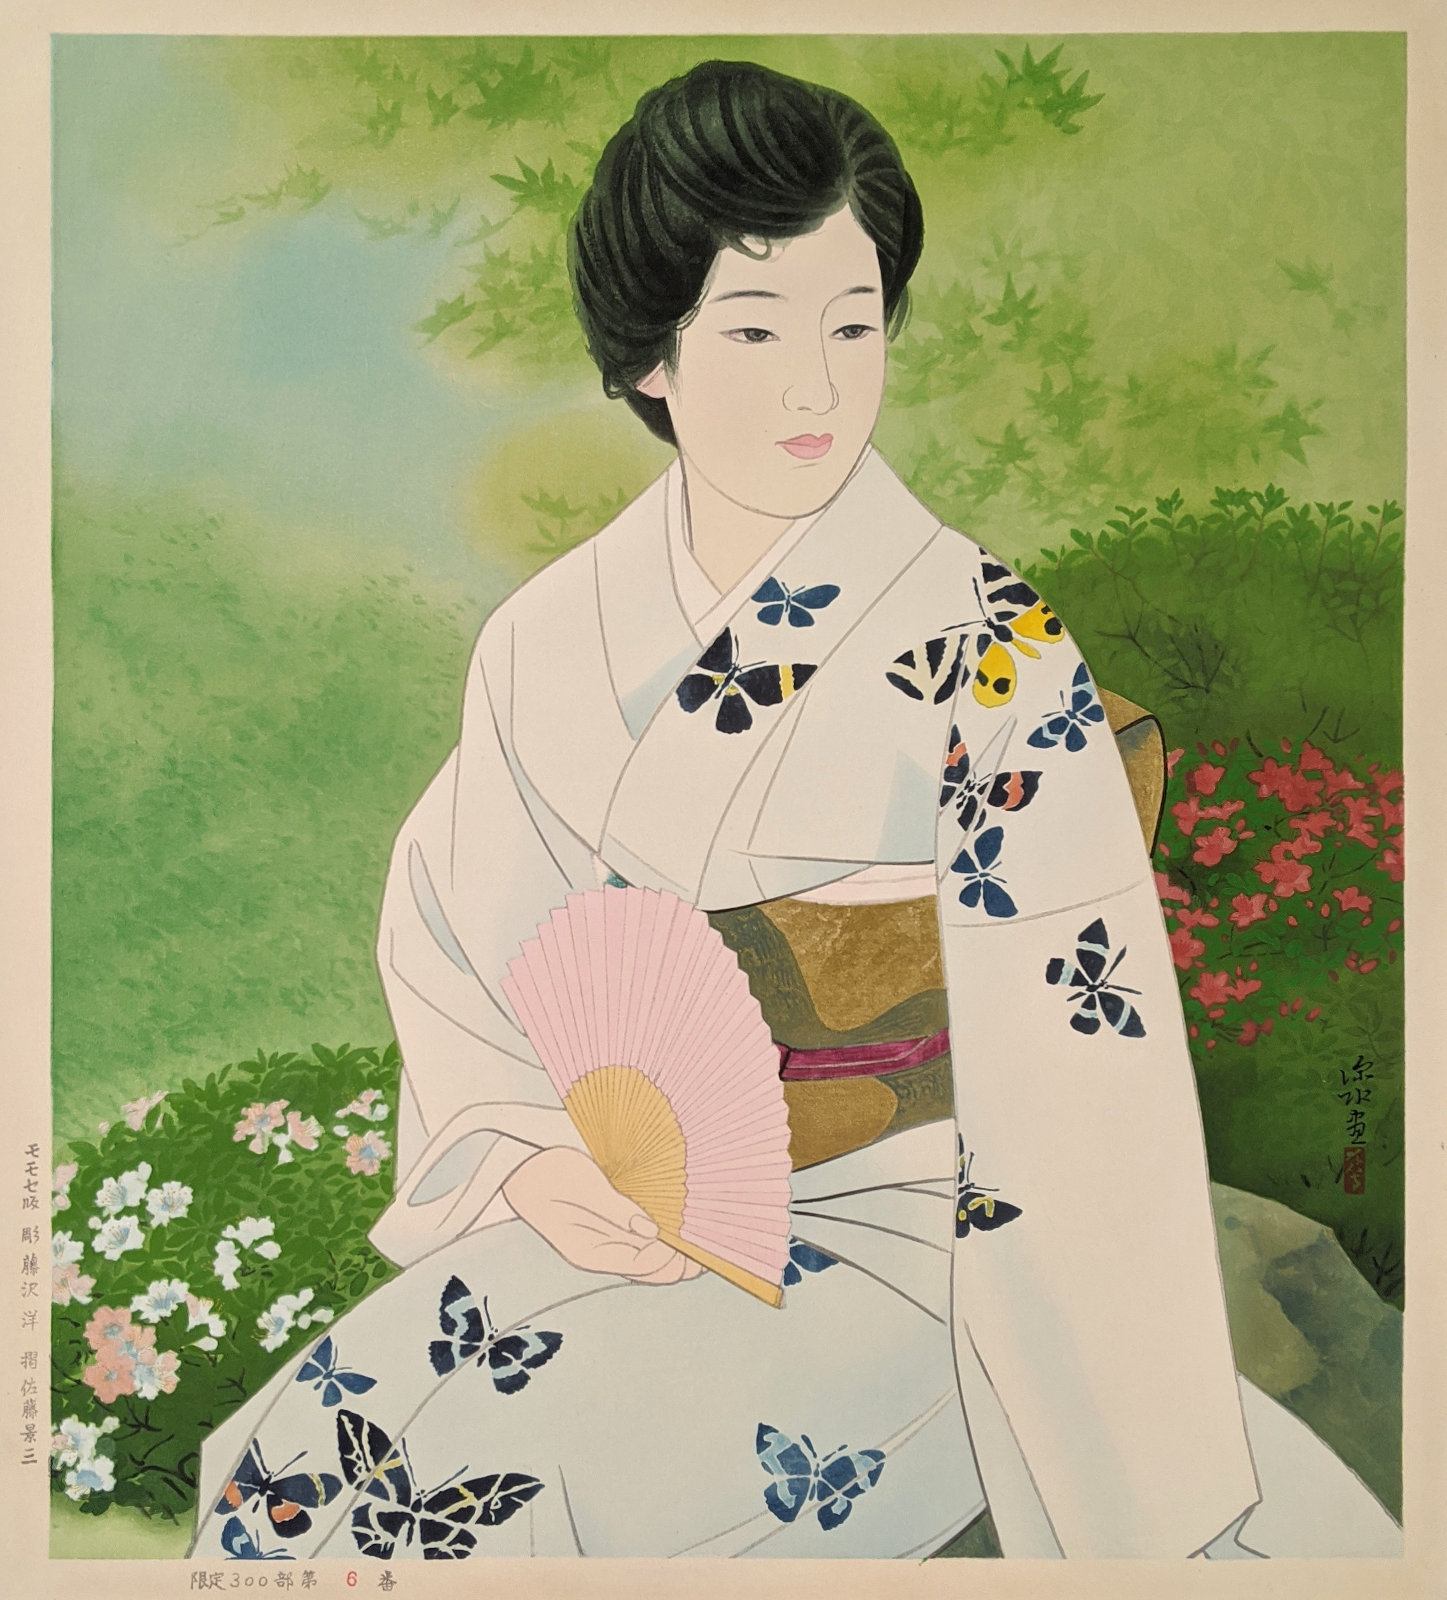 Ito Shinsui “Garden in Early Summer” 1985 woodblock print